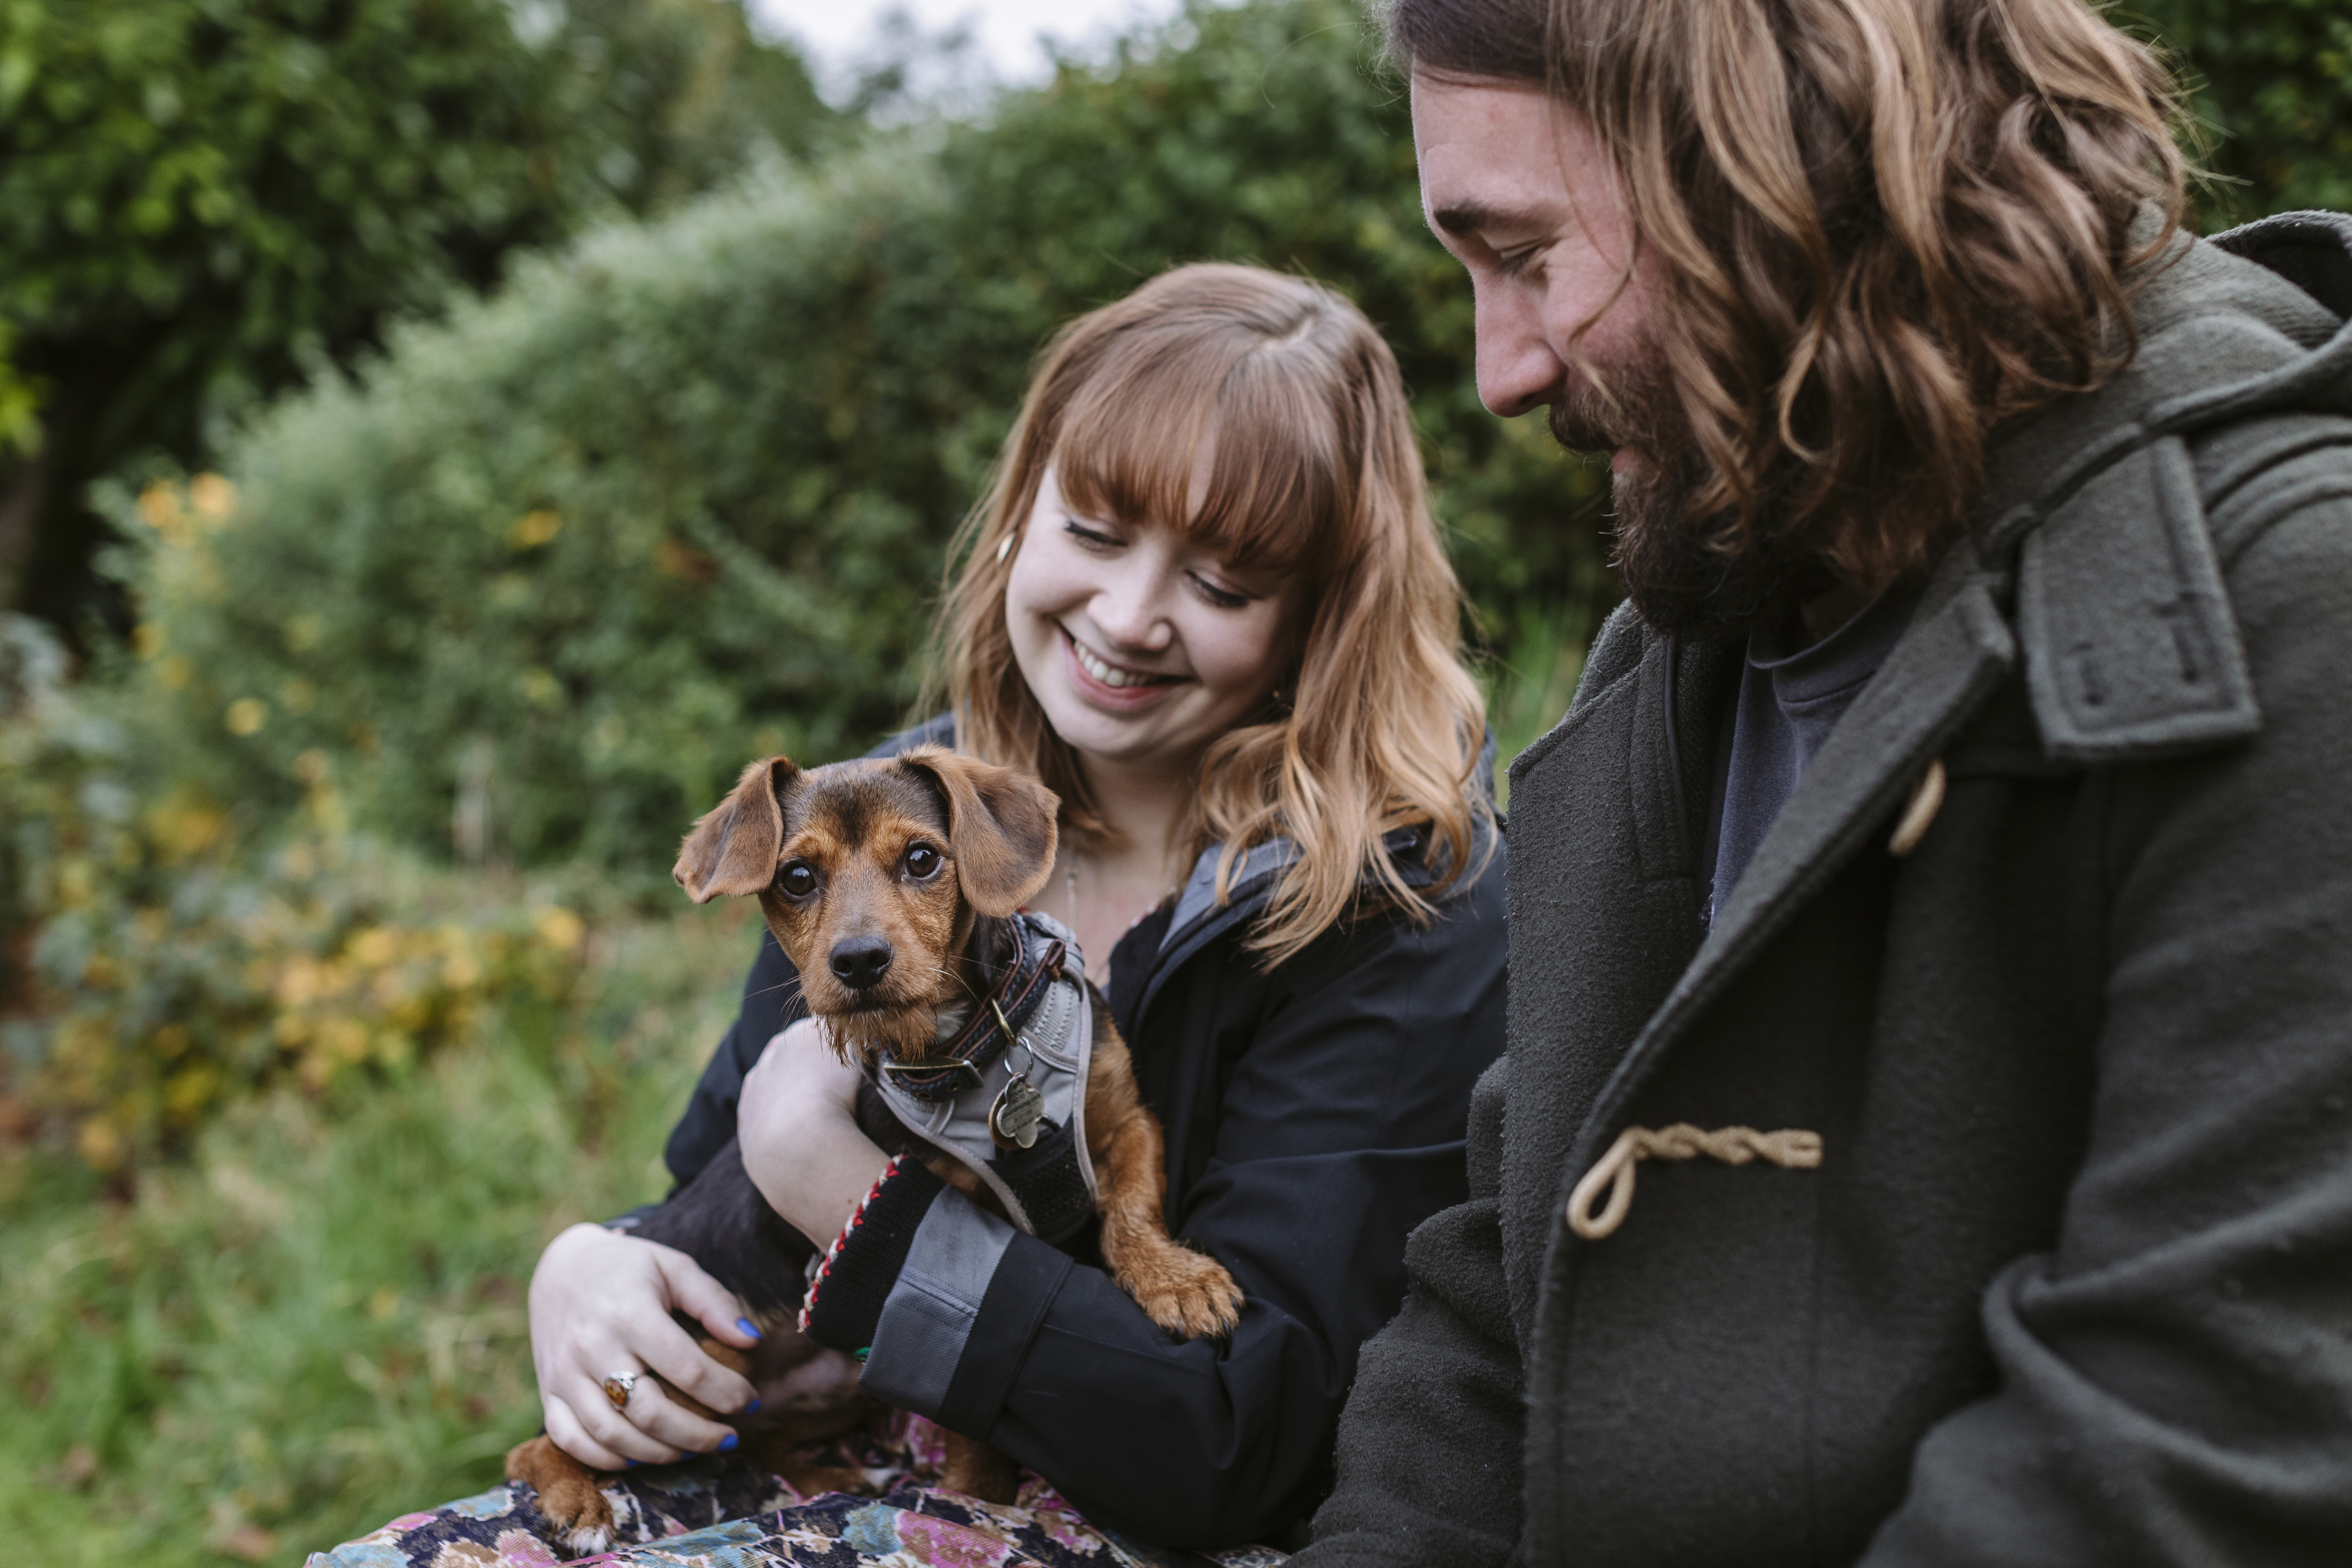 A small brown dog wearing a harness is held by their two owners.